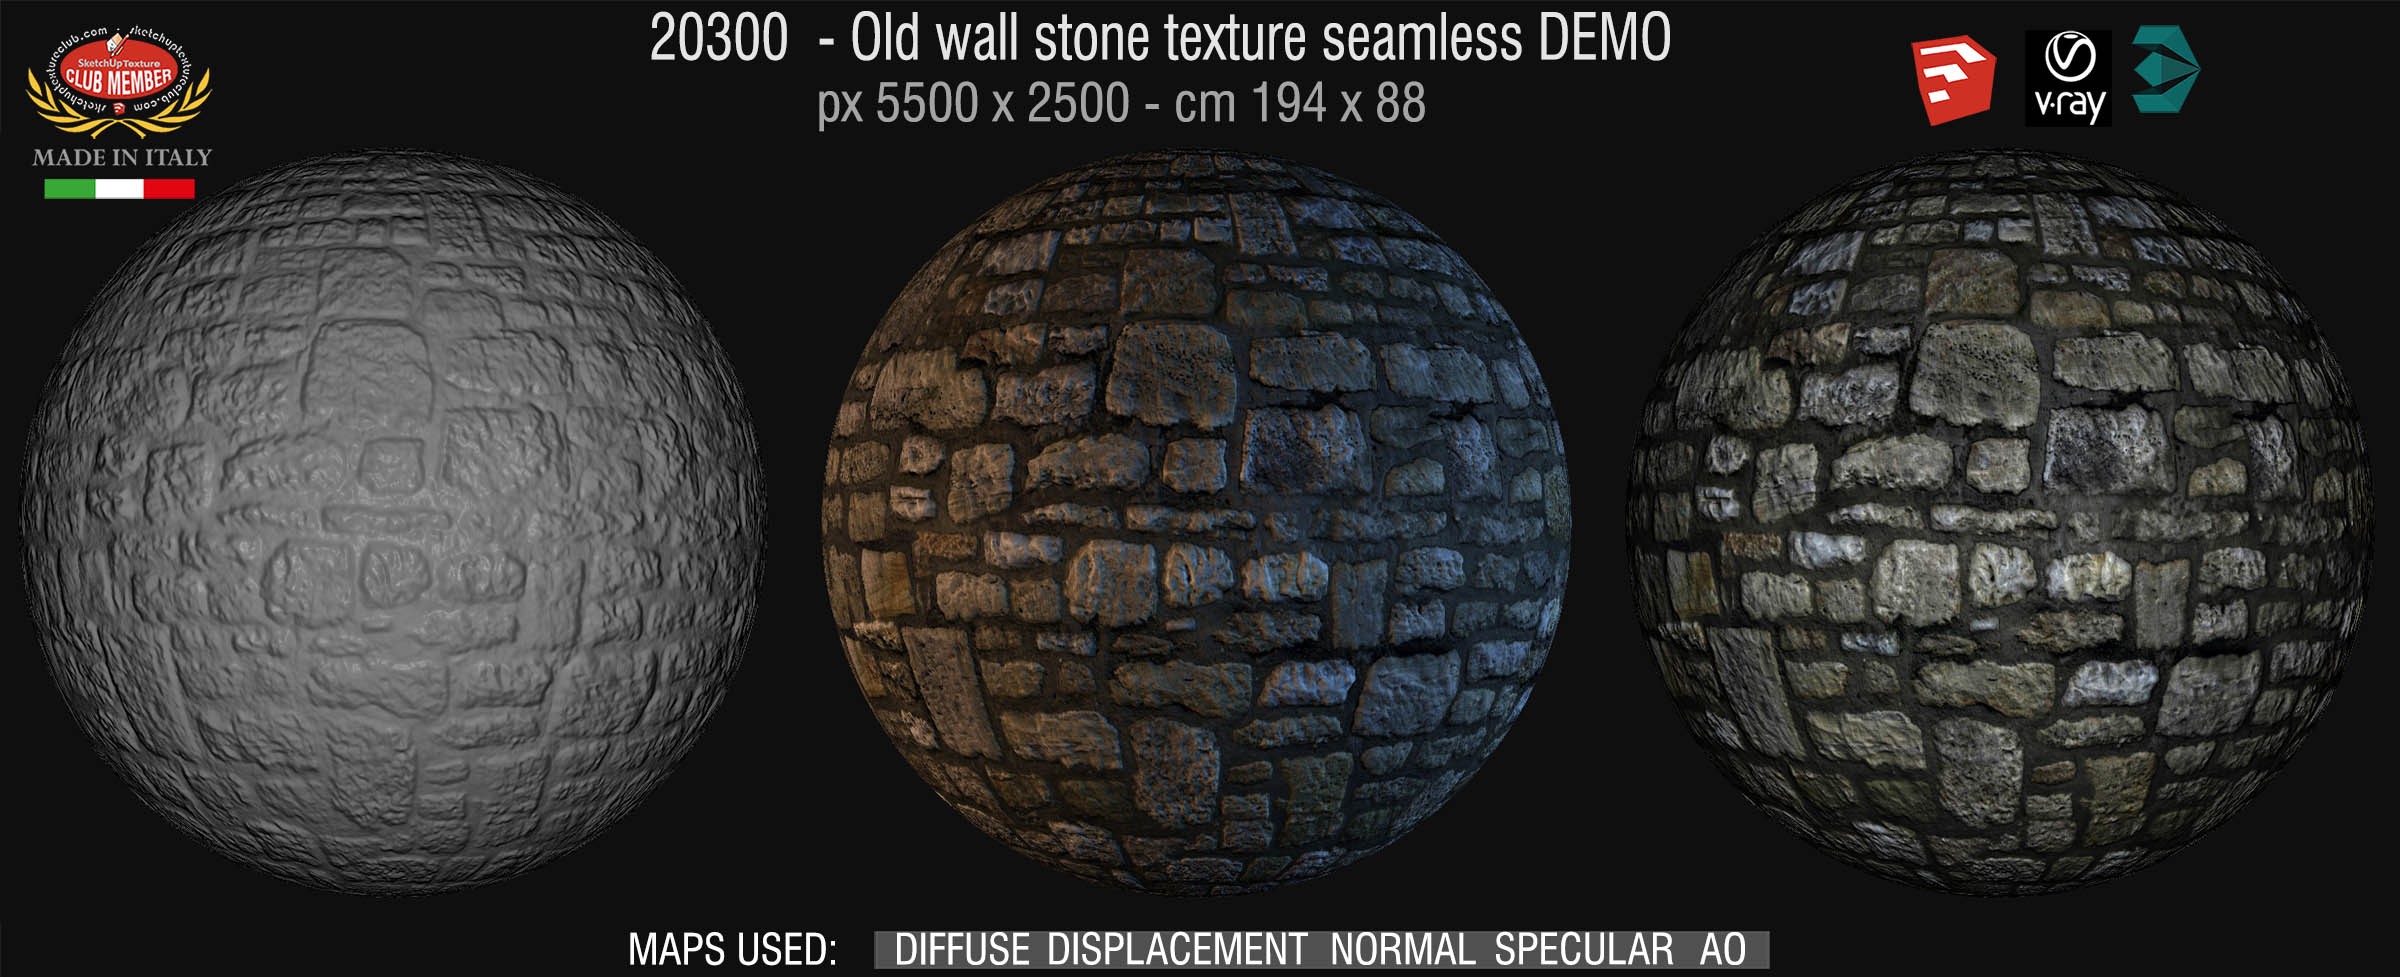 20300 HR  Old wall stone texture seamless + maps DEMO